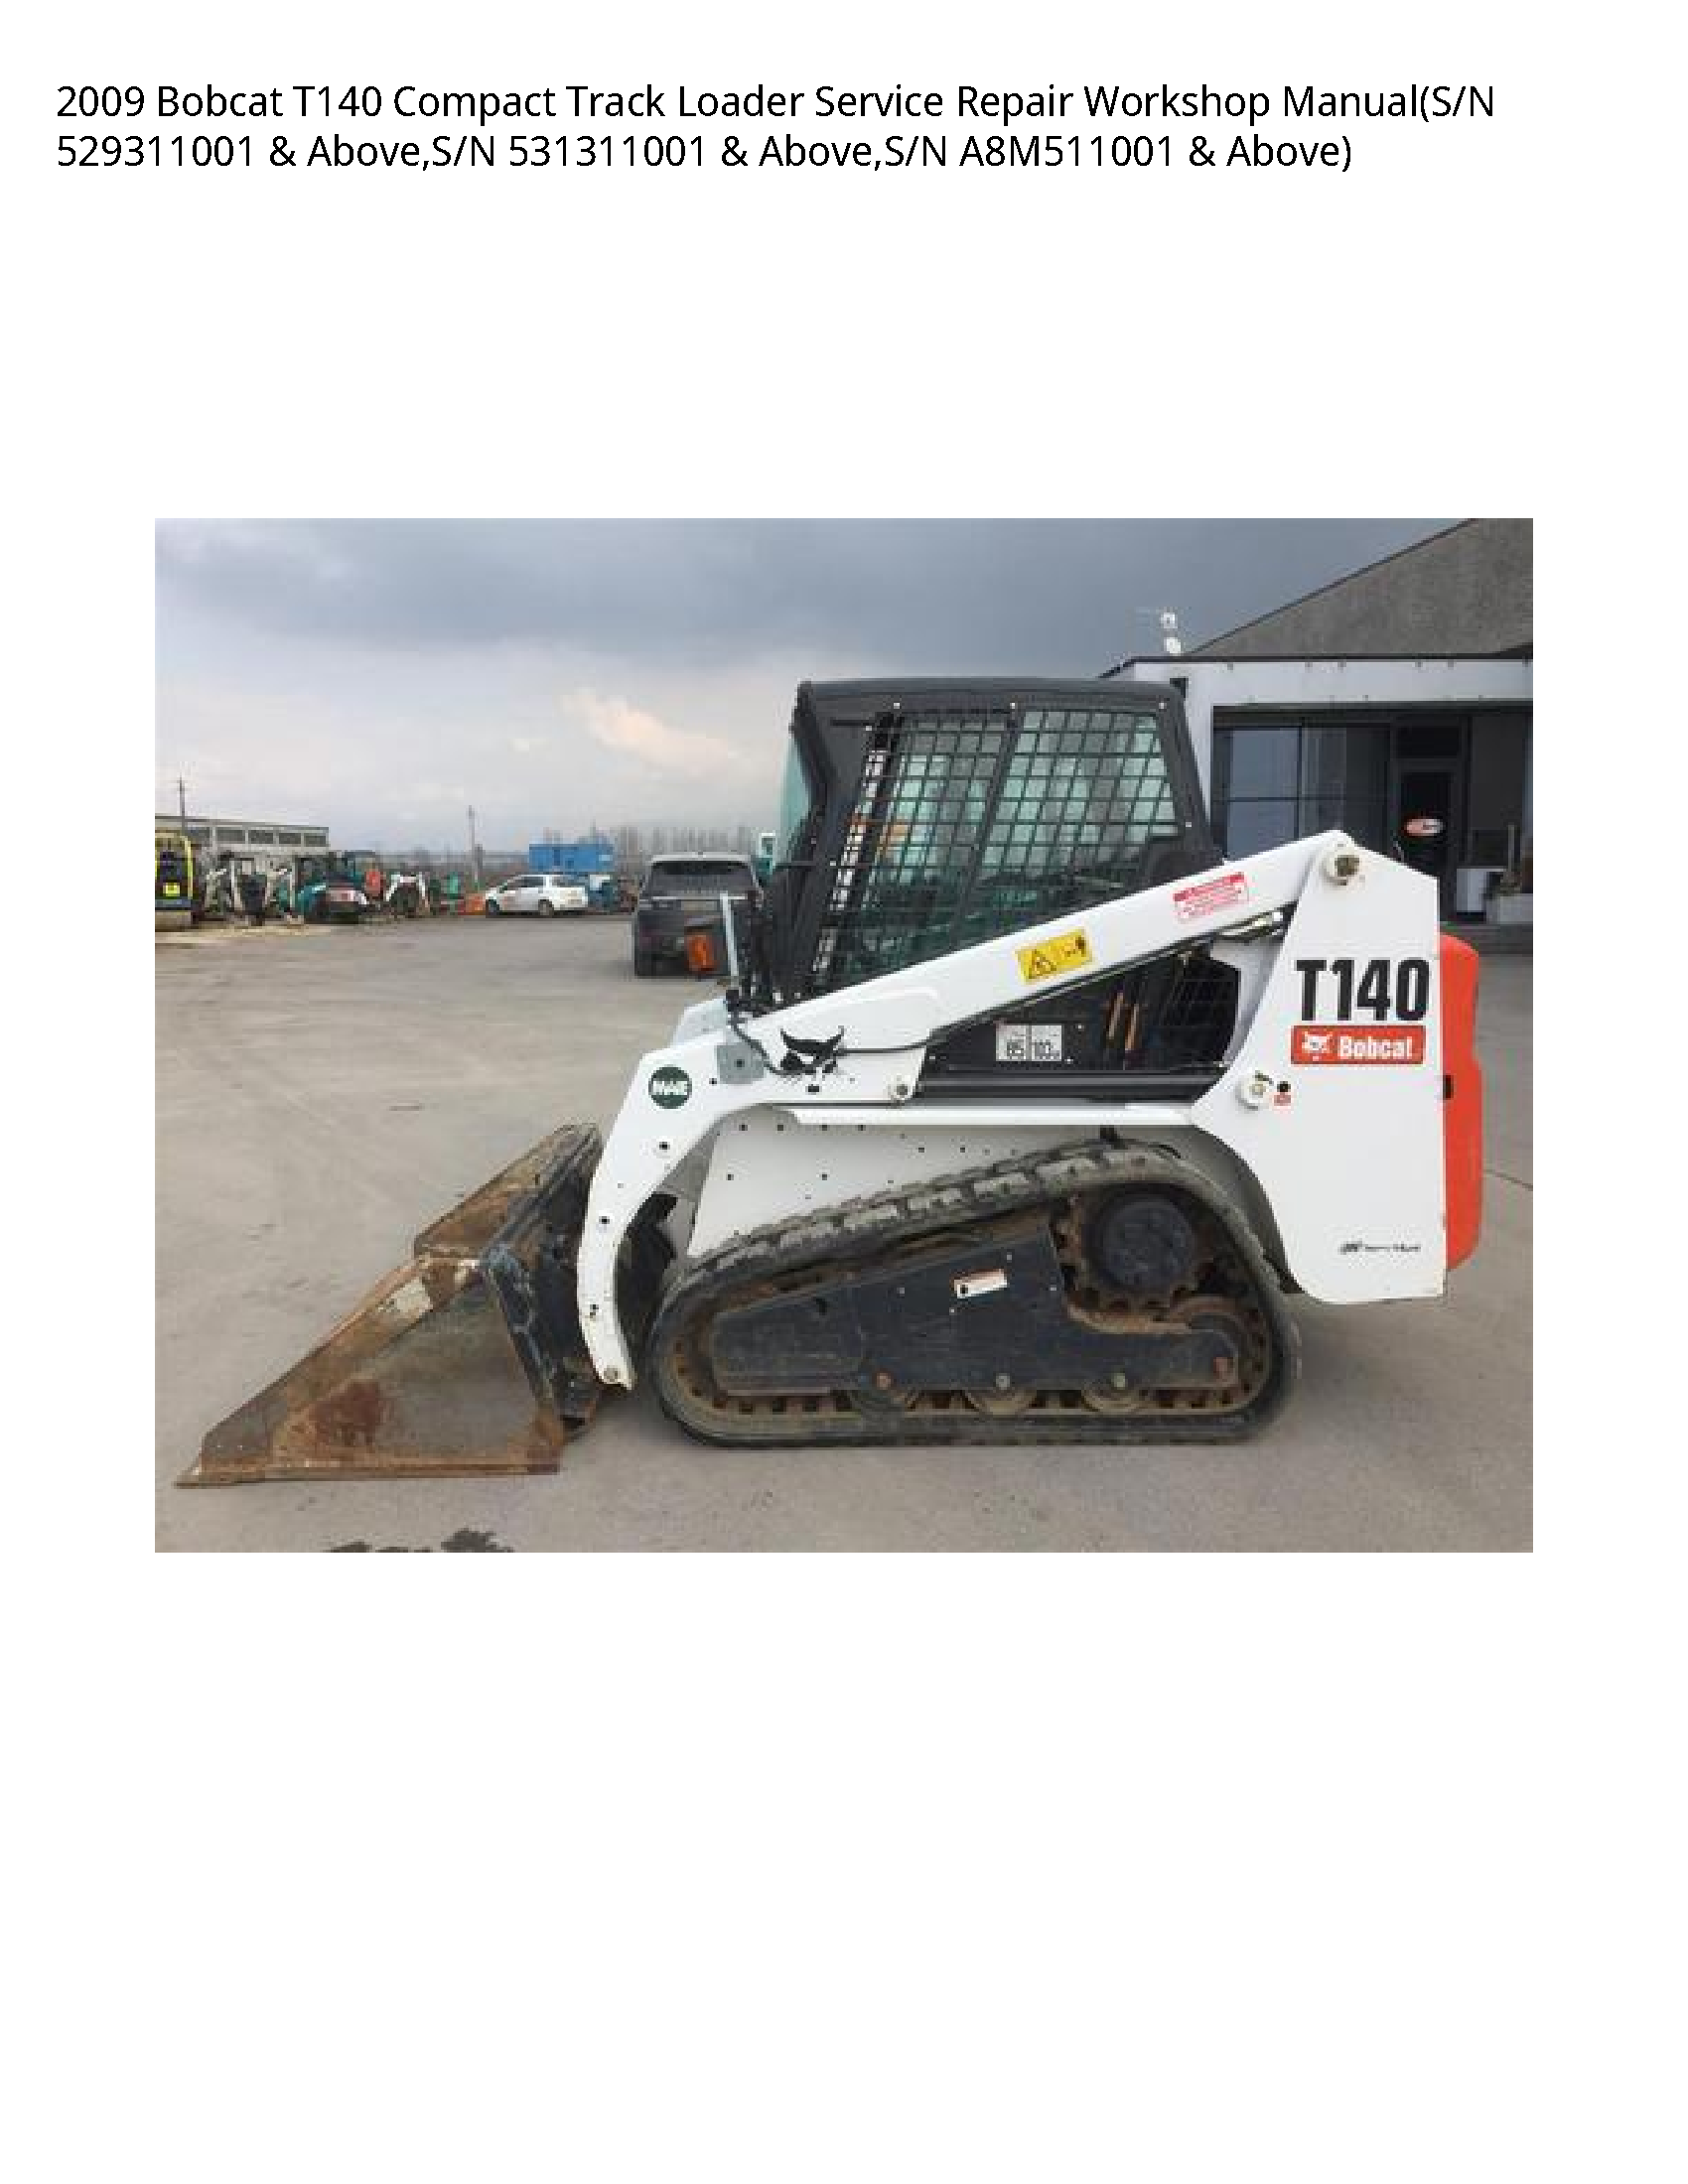 2009 Bobcat T140 Compact Track Loader Service Repair Workshop Manual(S/N 529311001 & Above S/N 531311001 & Above S/N A8M511001 & Above)